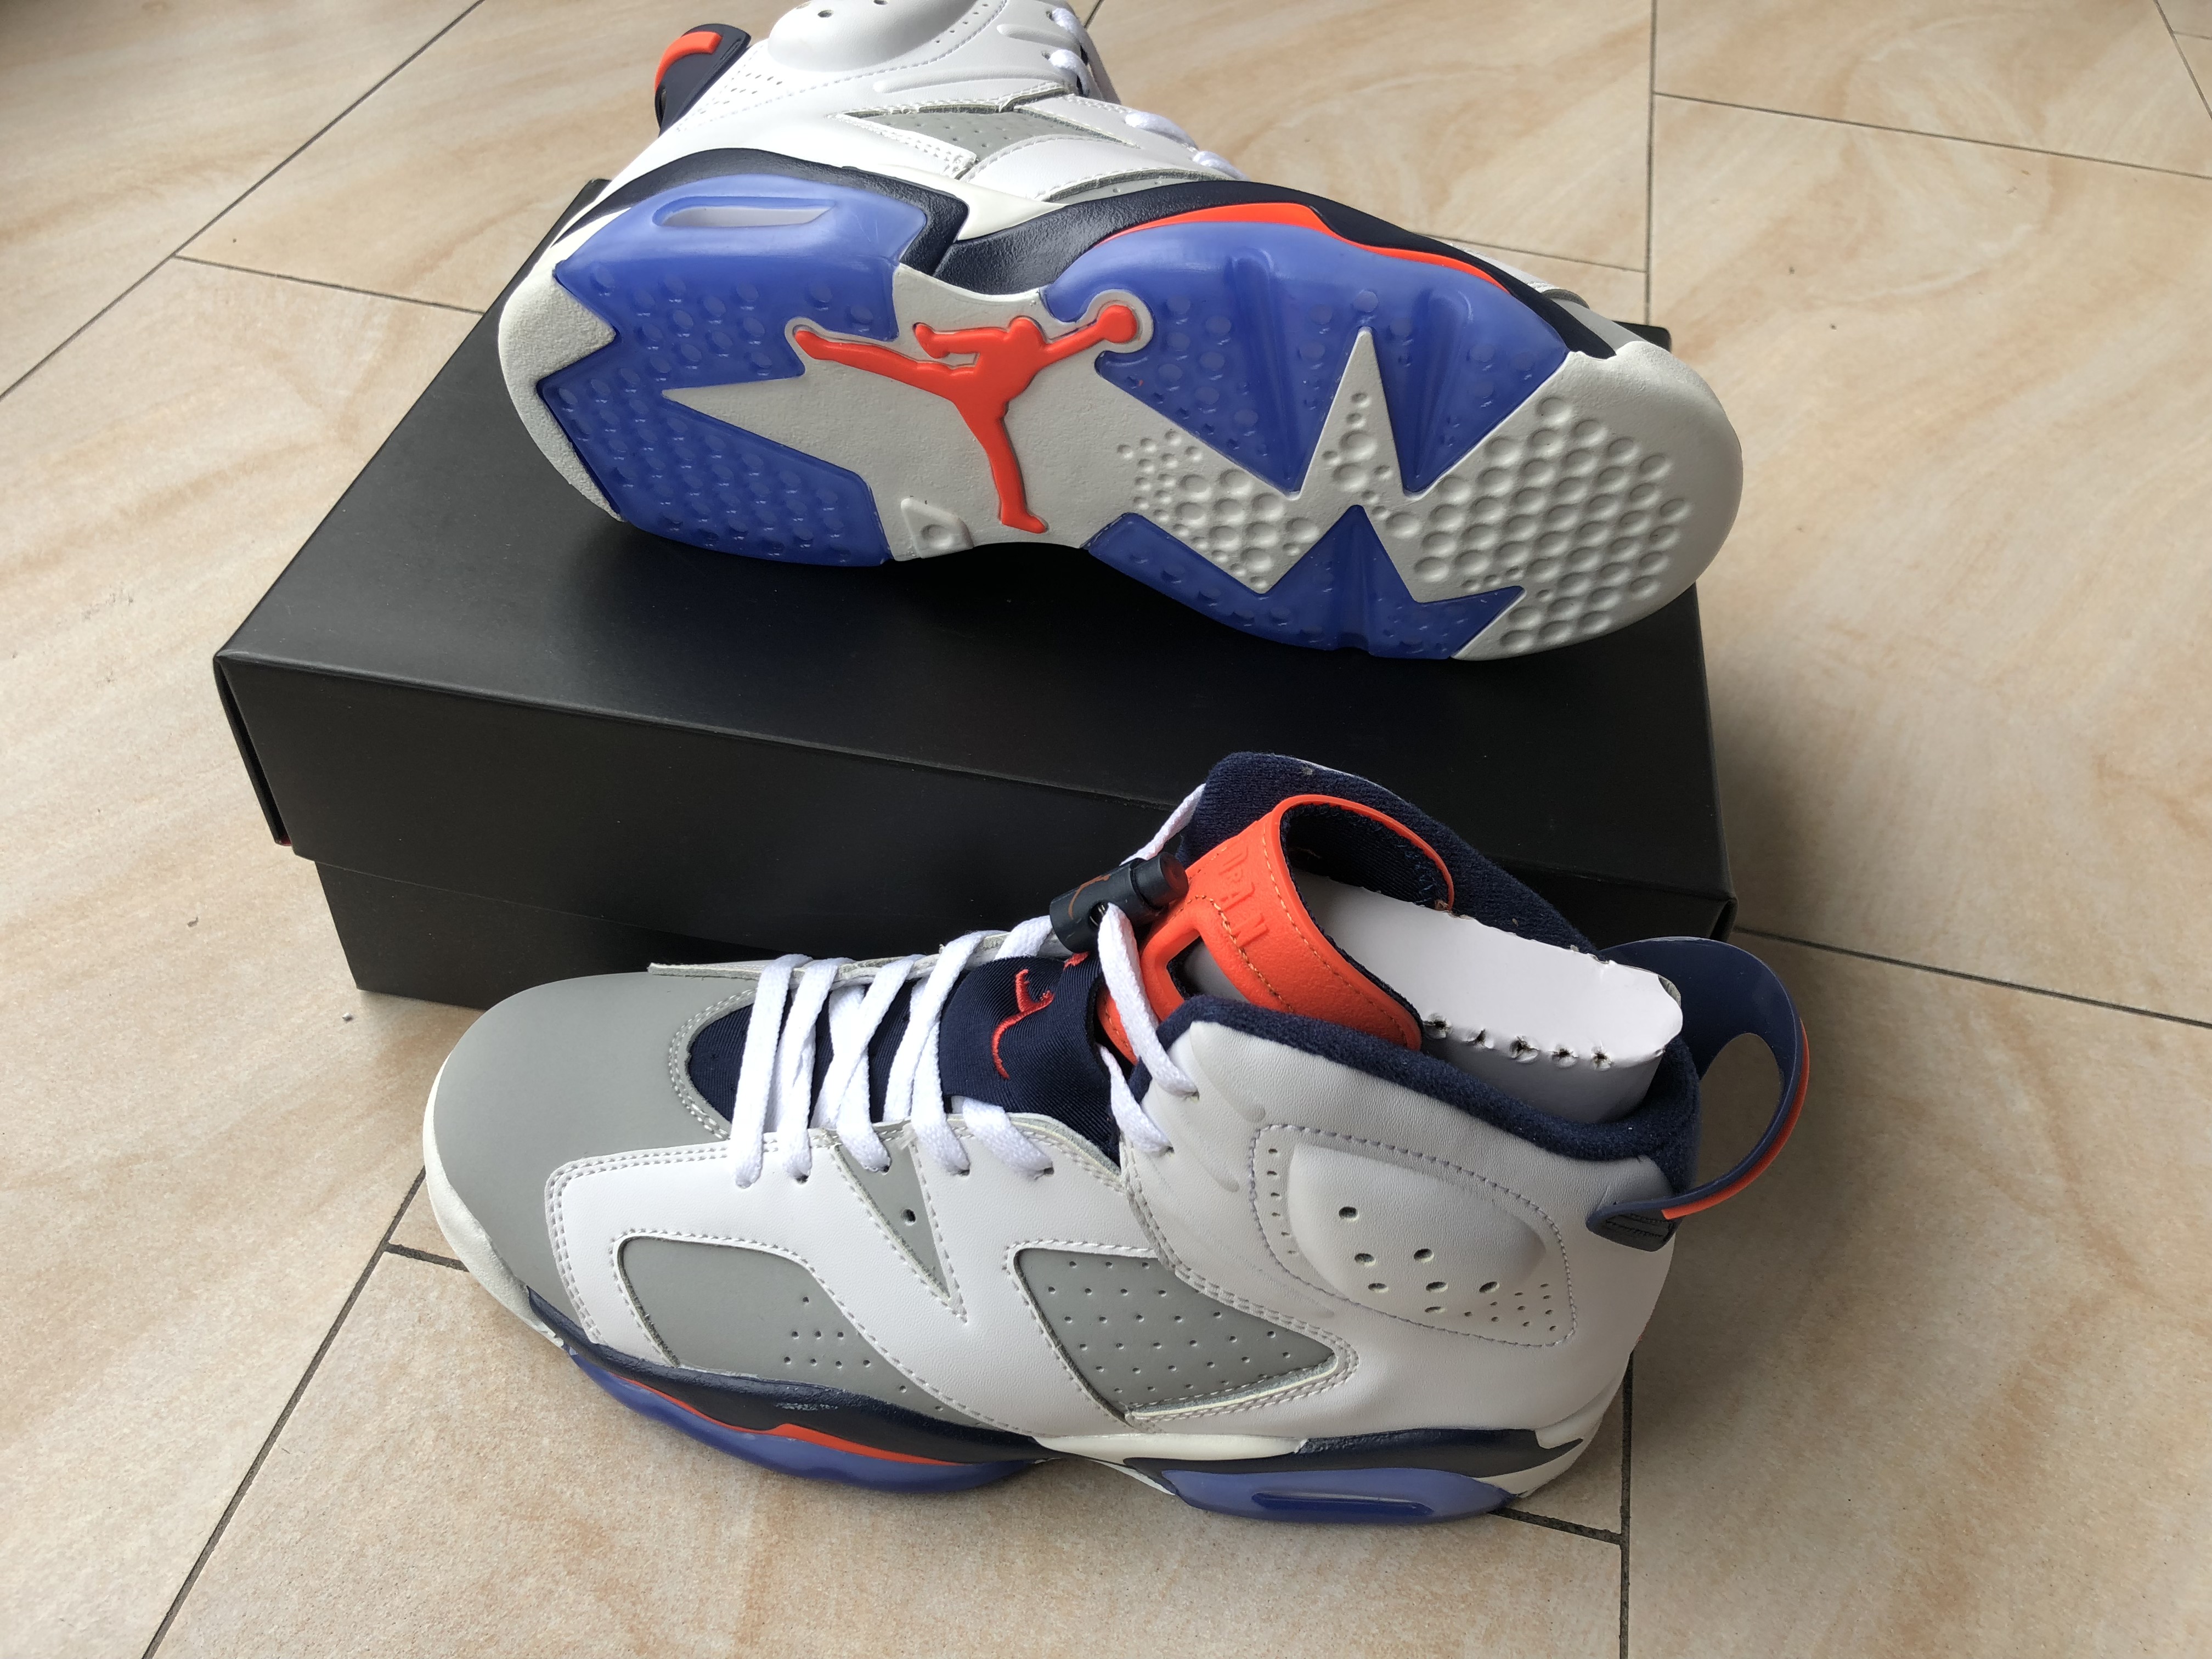 New Air Jordan 6 Handcraft Grey White Red Blue Shoes - Click Image to Close